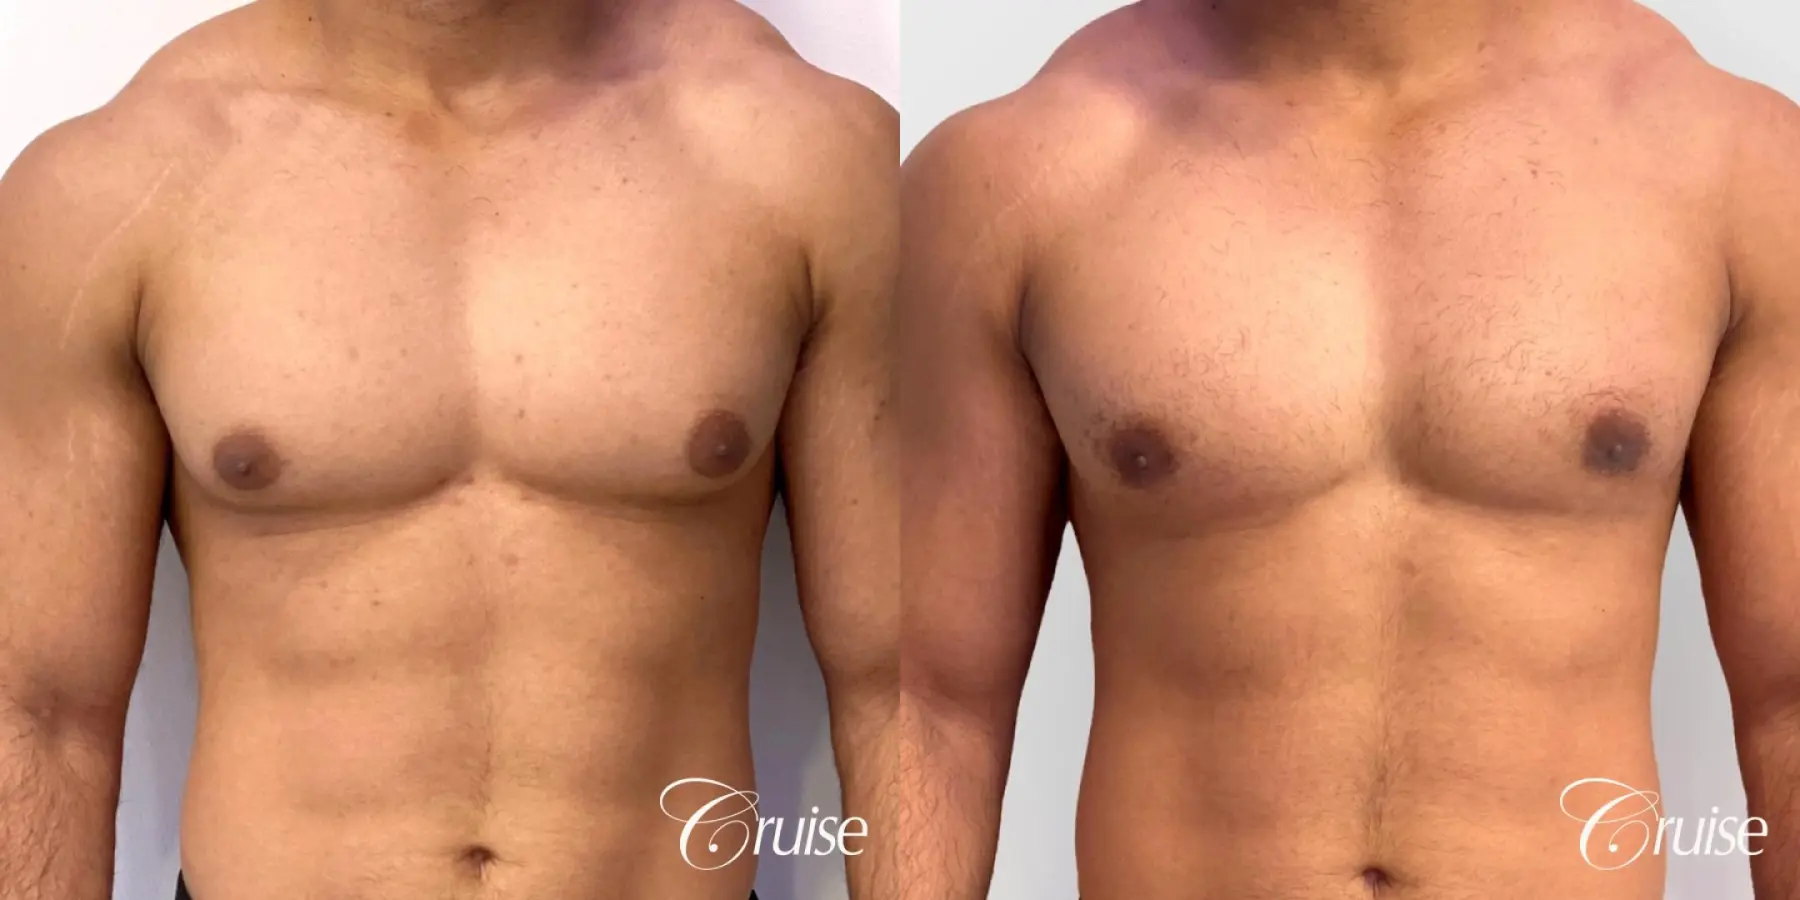 Type 1 Gynecomastia with Puffy Nipples - Before and After 1